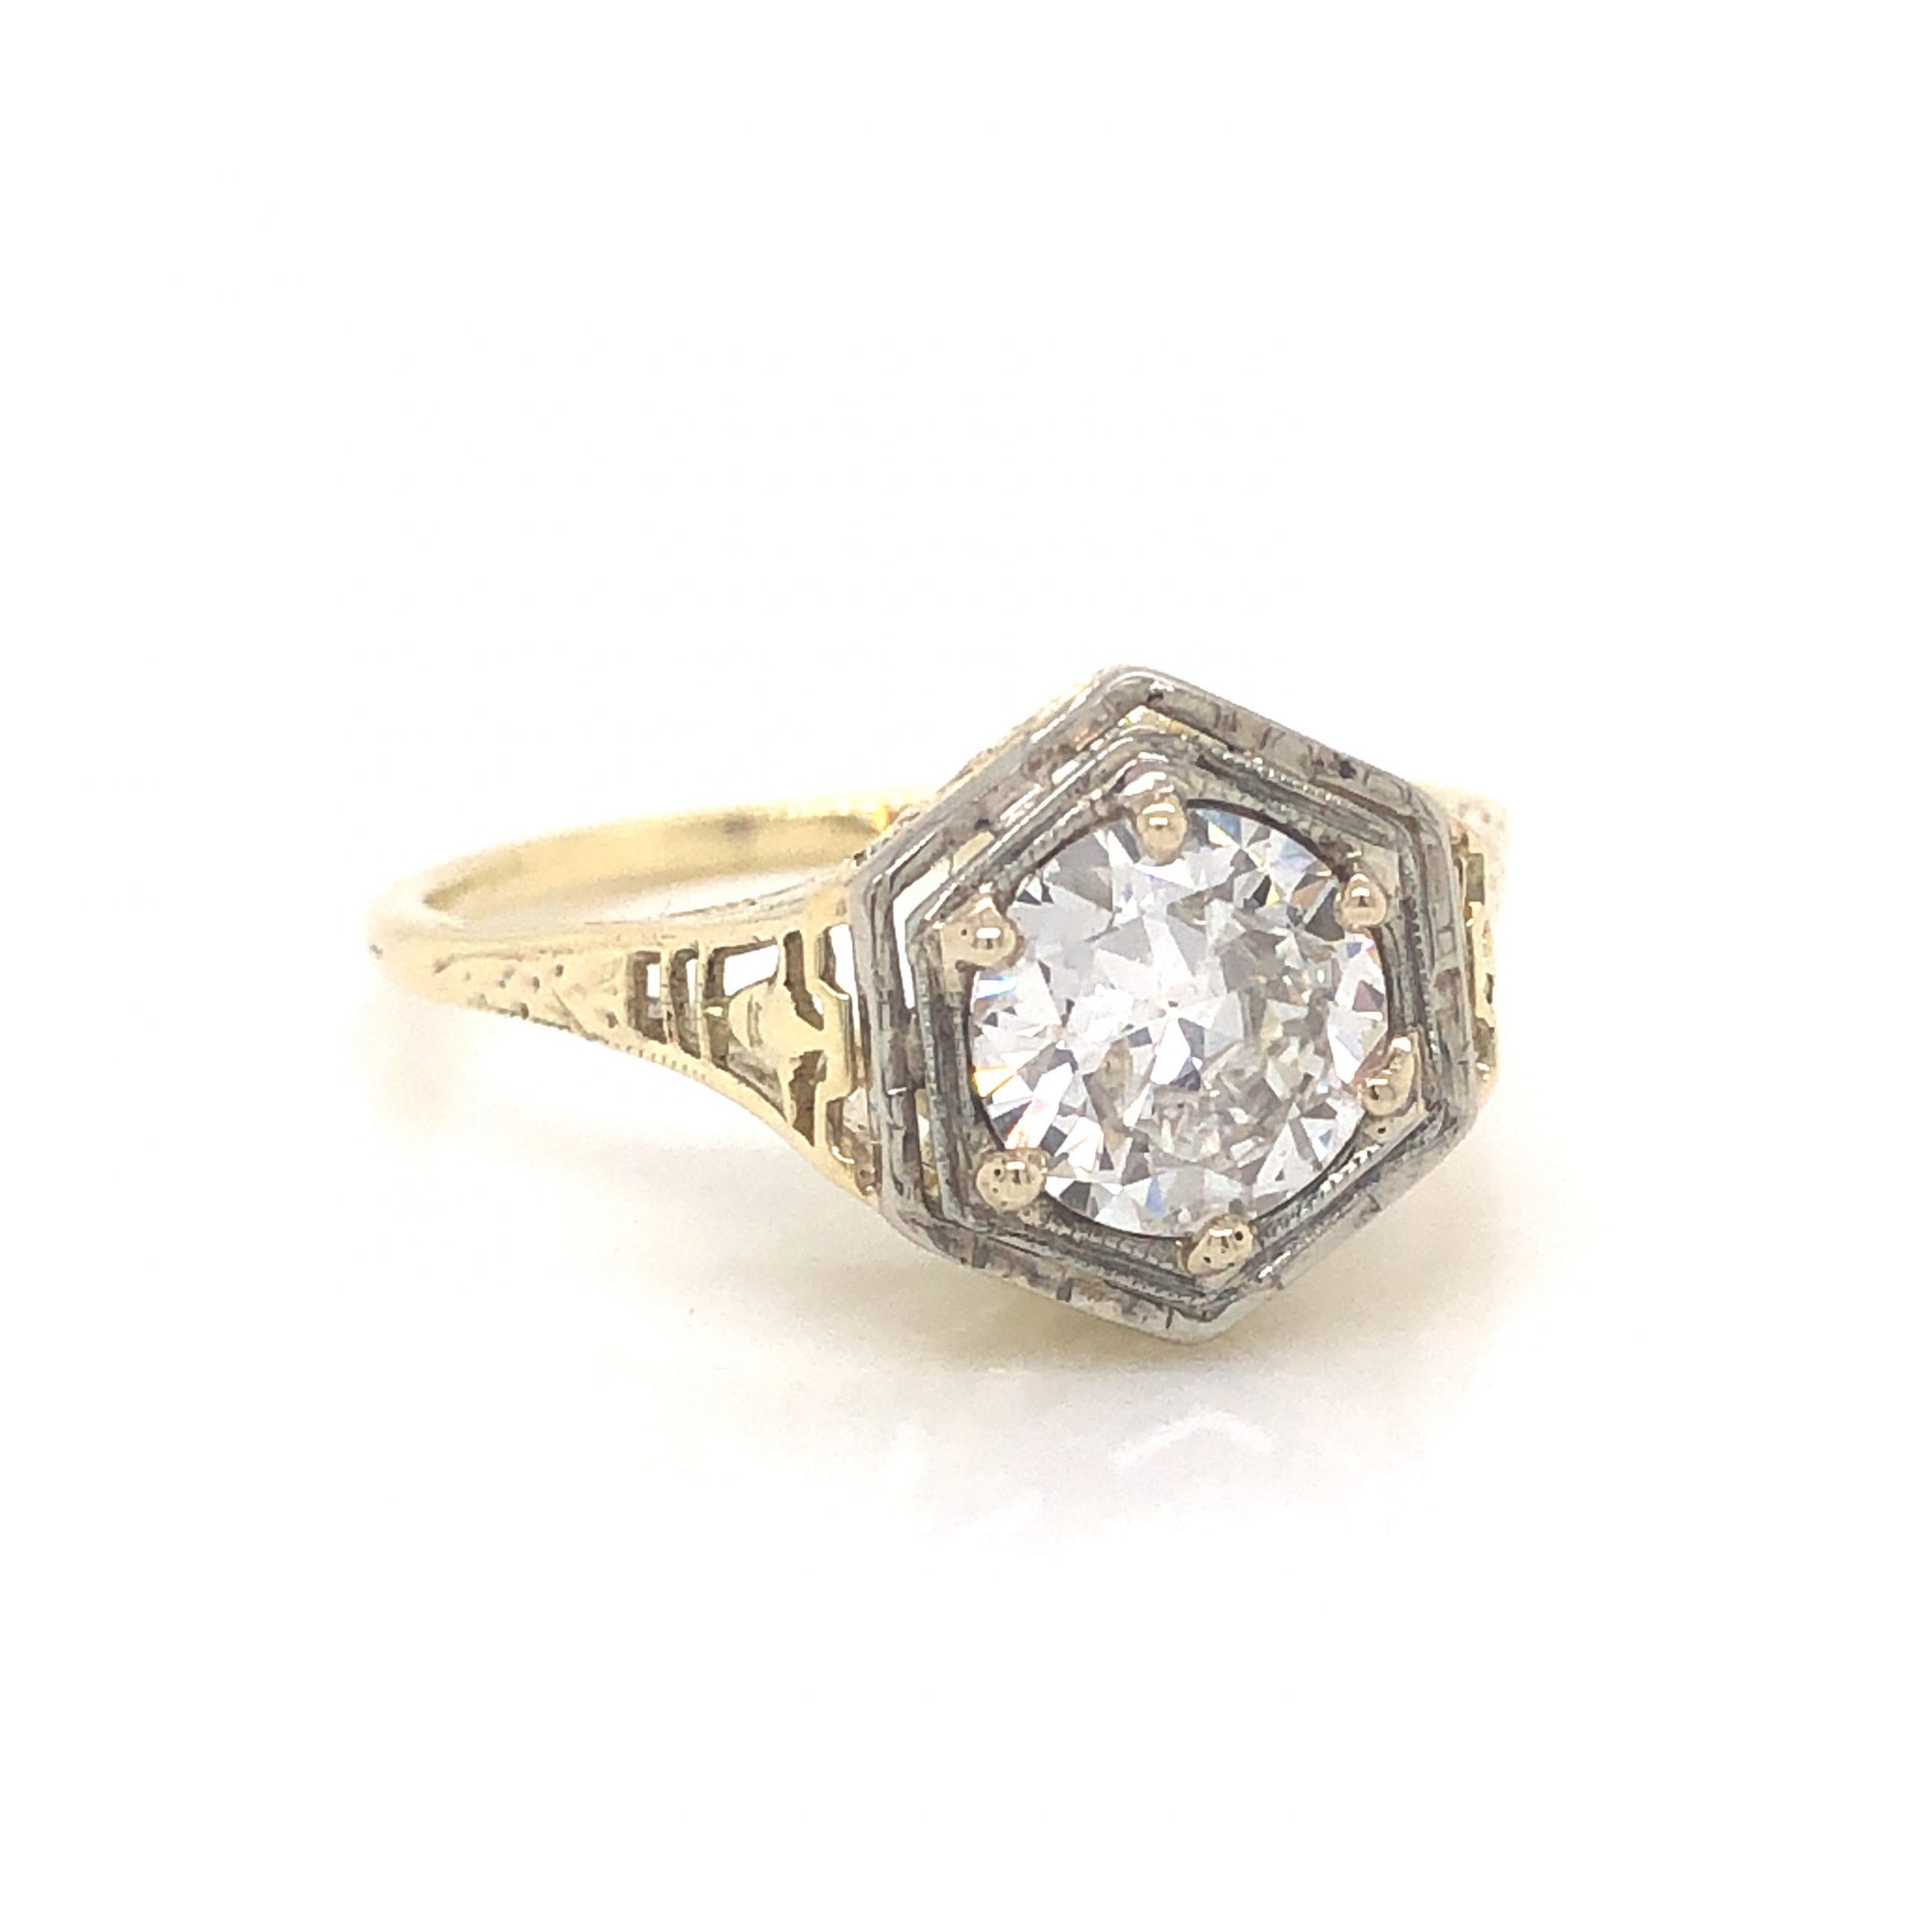 .86 Two-Toned Art Deco Diamond Engagement Ring in 14kComposition: Platinum Ring Size: 7.25 Total Diamond Weight: .86ct Total Gram Weight: 2.6 g Inscription: 14k
      